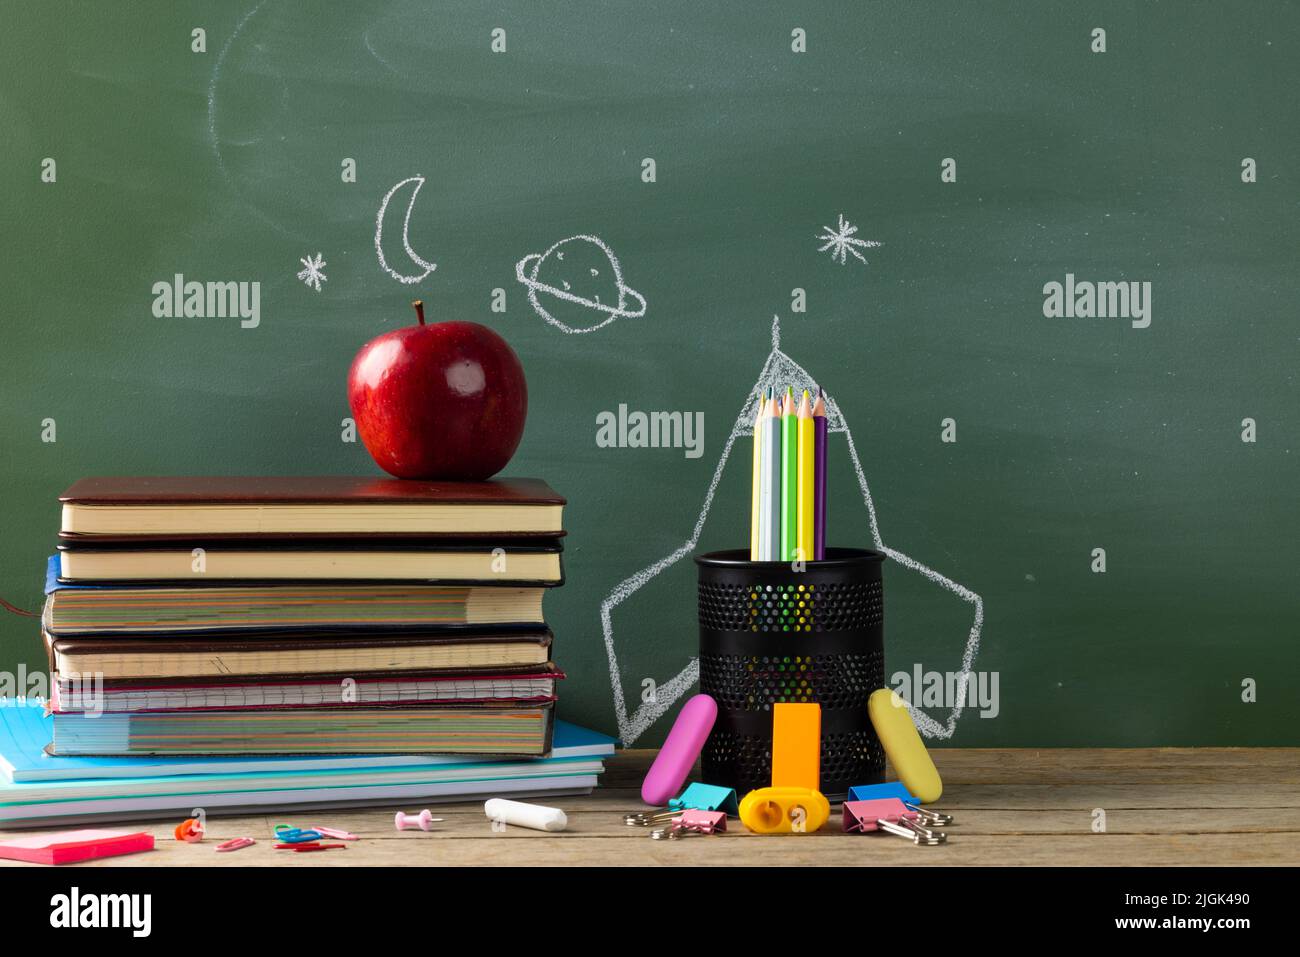 Image of school supplies, apple and notebook over drawings on black board Stock Photo